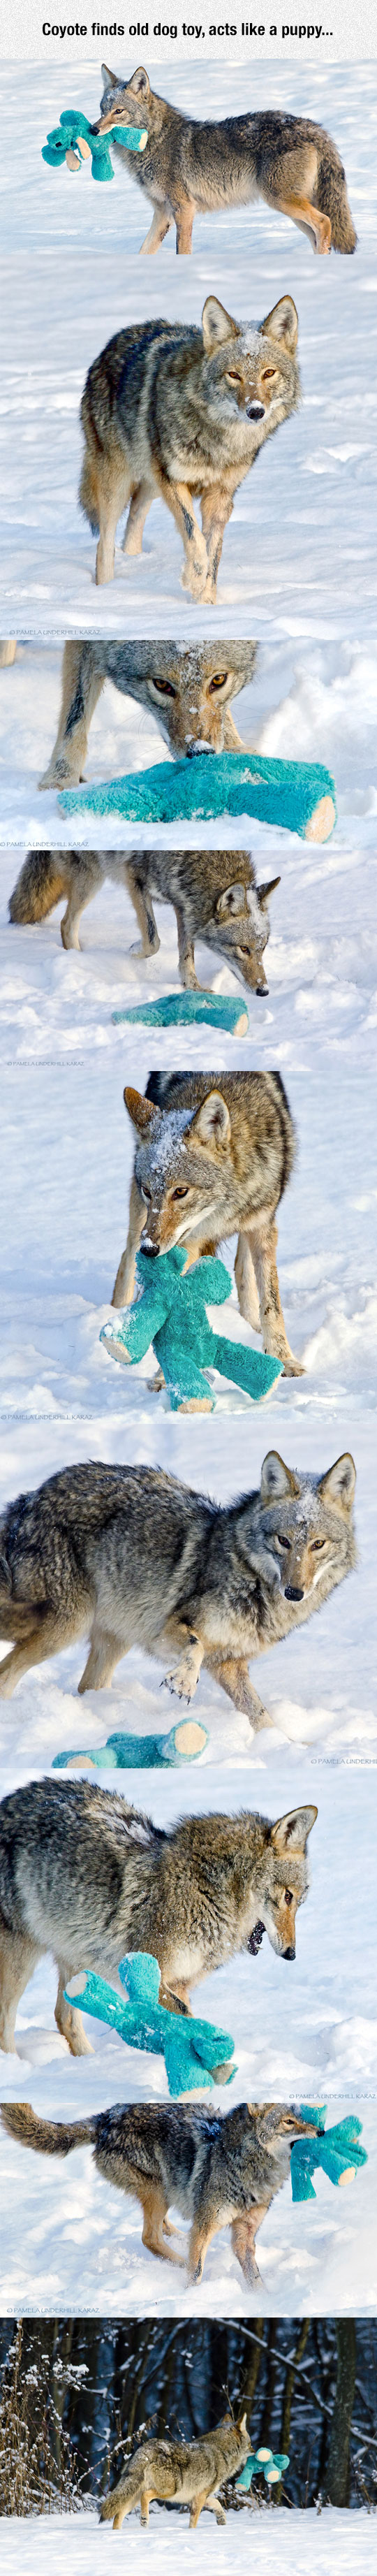 cool-coyote-playing-dog-toy-snow